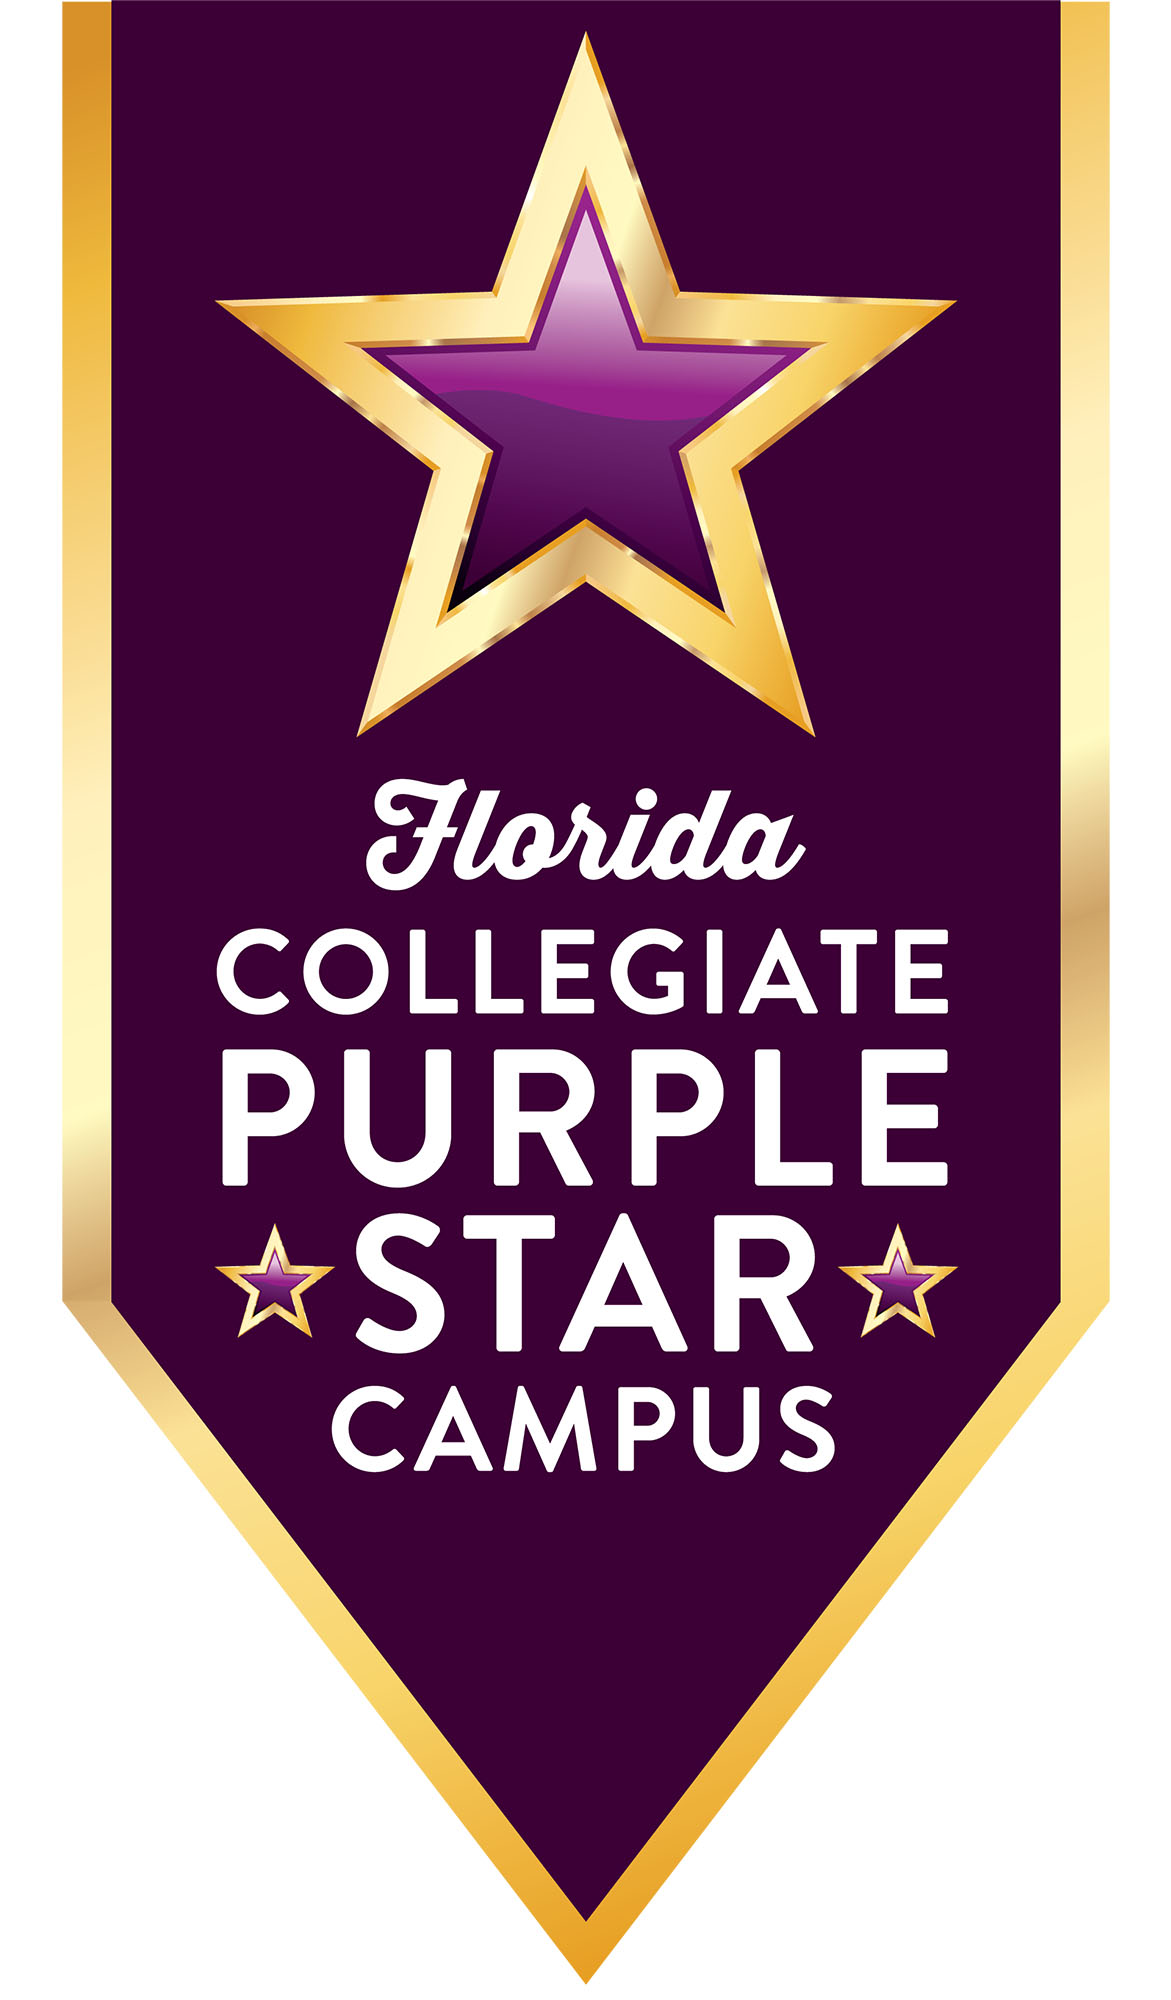 State College of Florida is officially designated a Collegiate Purple Star Campus for the services it provides at all sites to all active military and veteran students and their families.